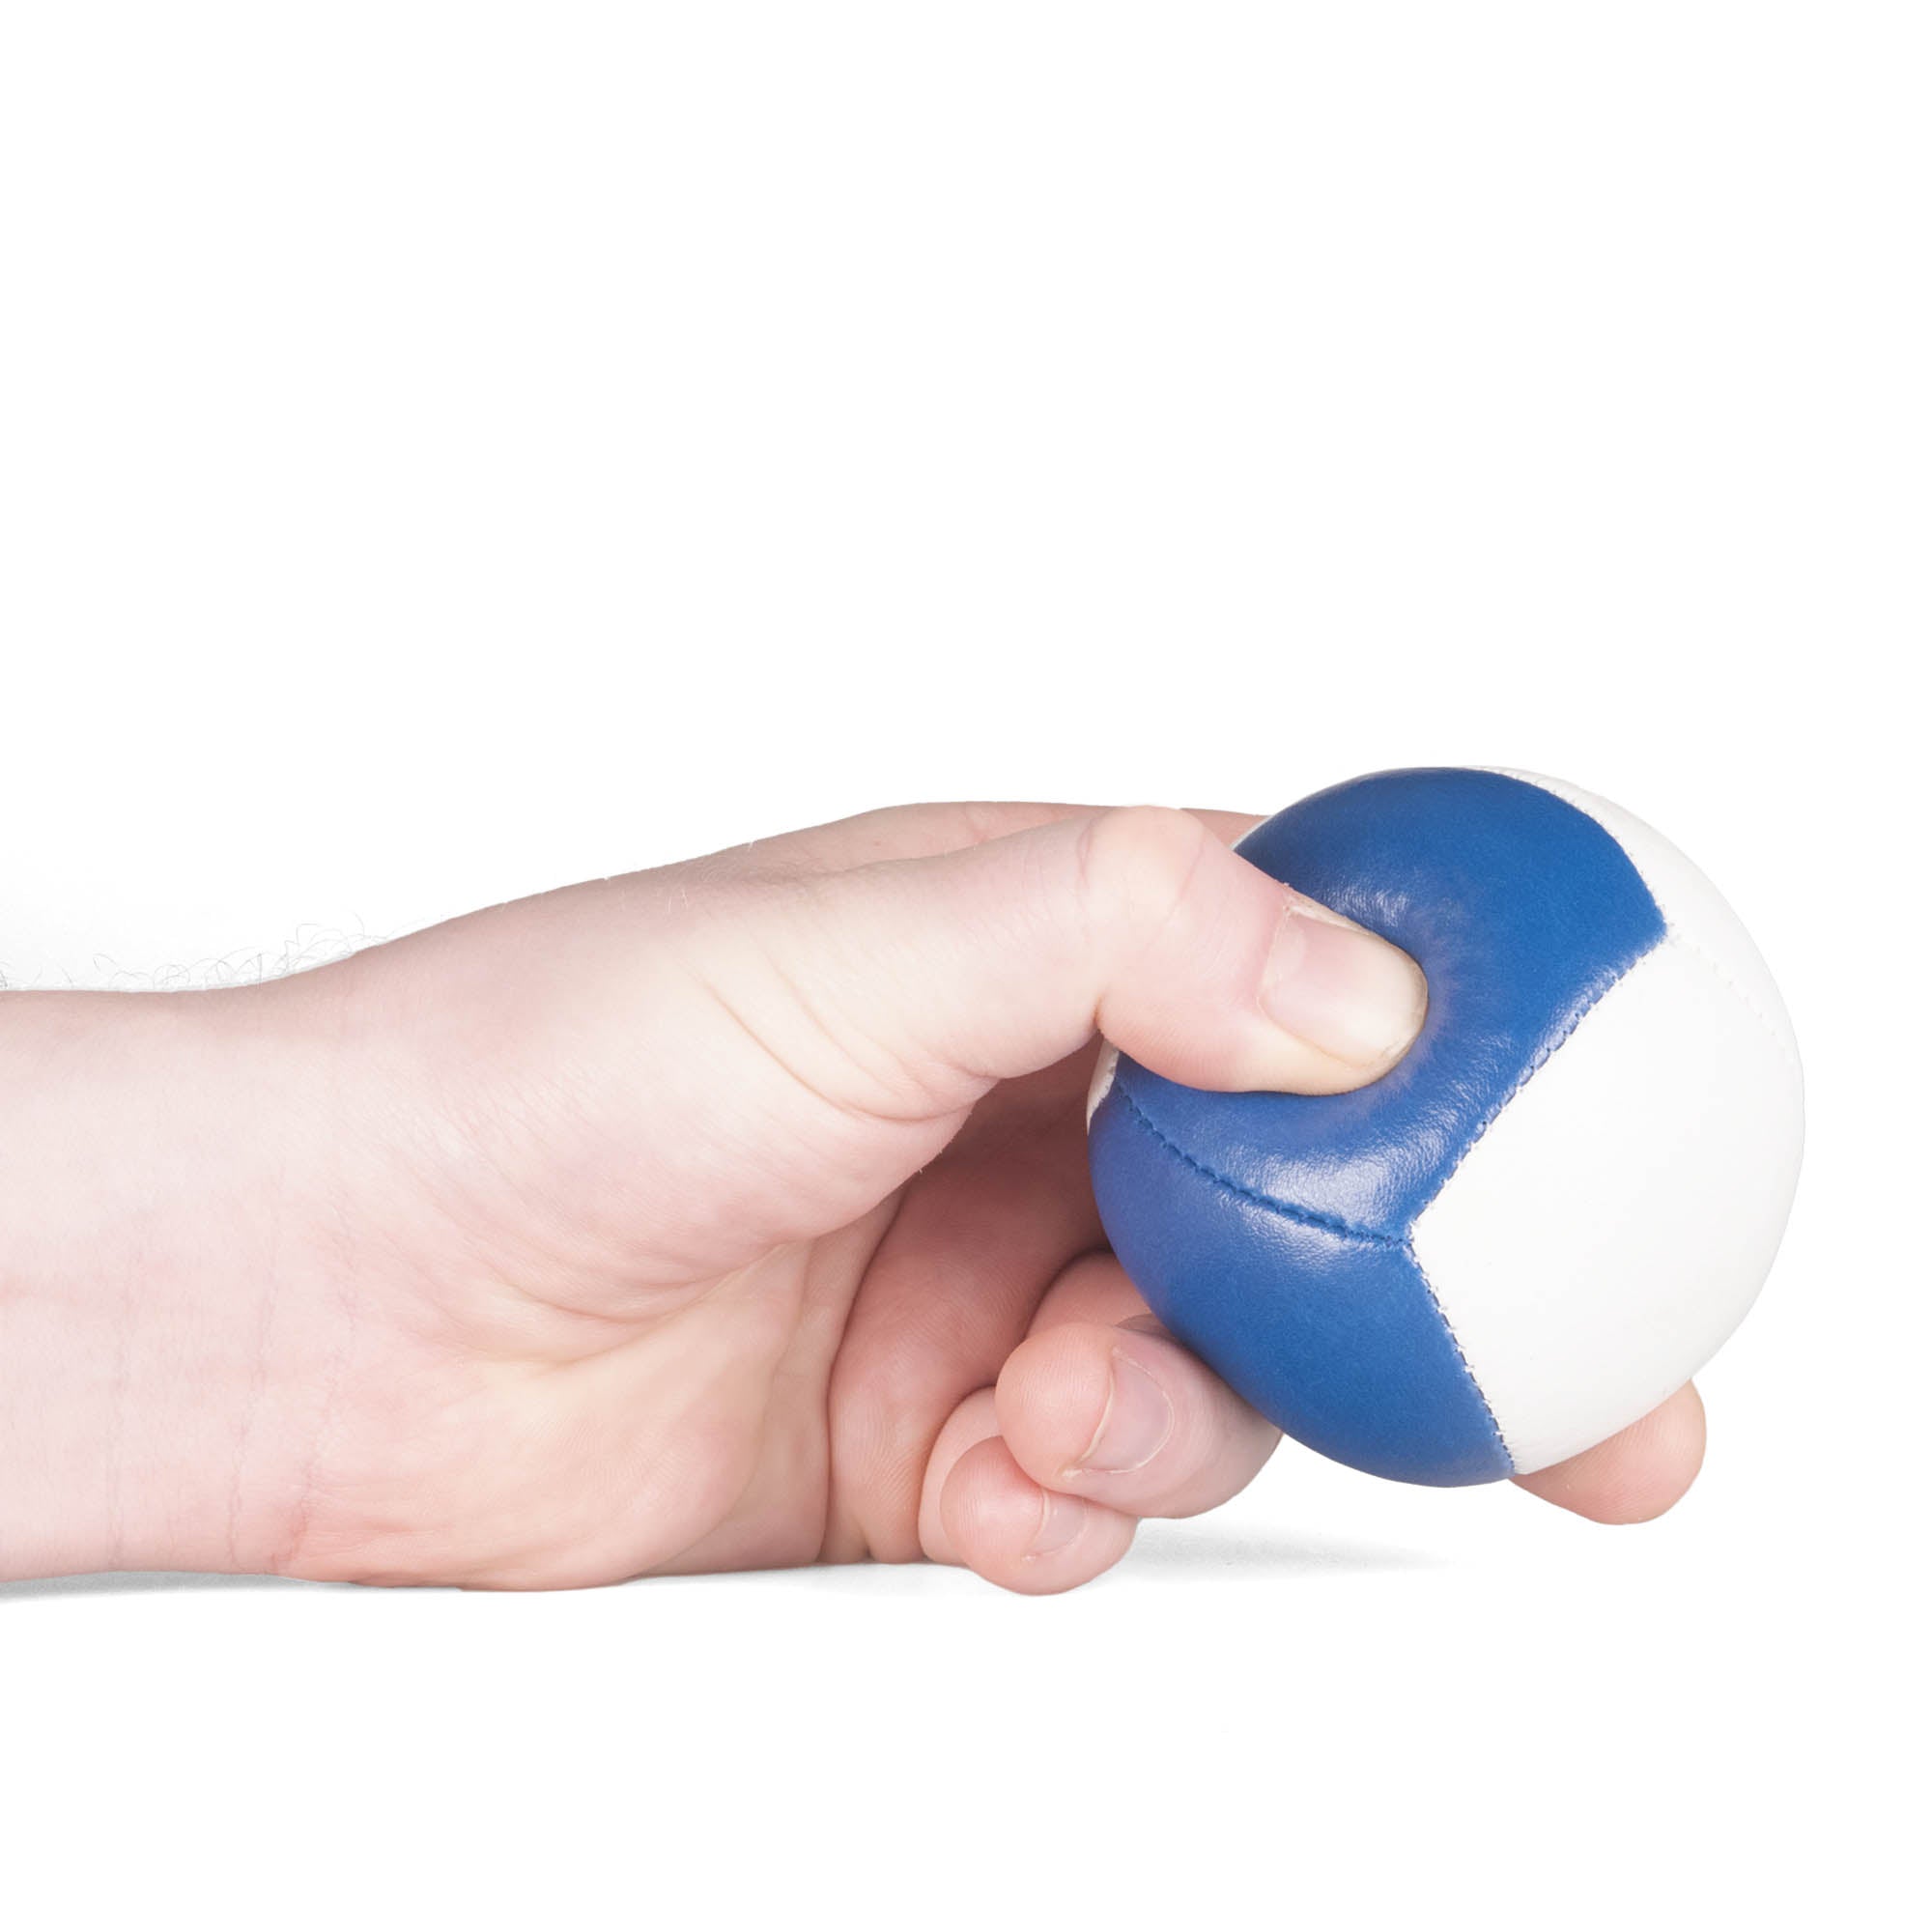 Firetoys blue/white 110g thud juggling ball being squeezed